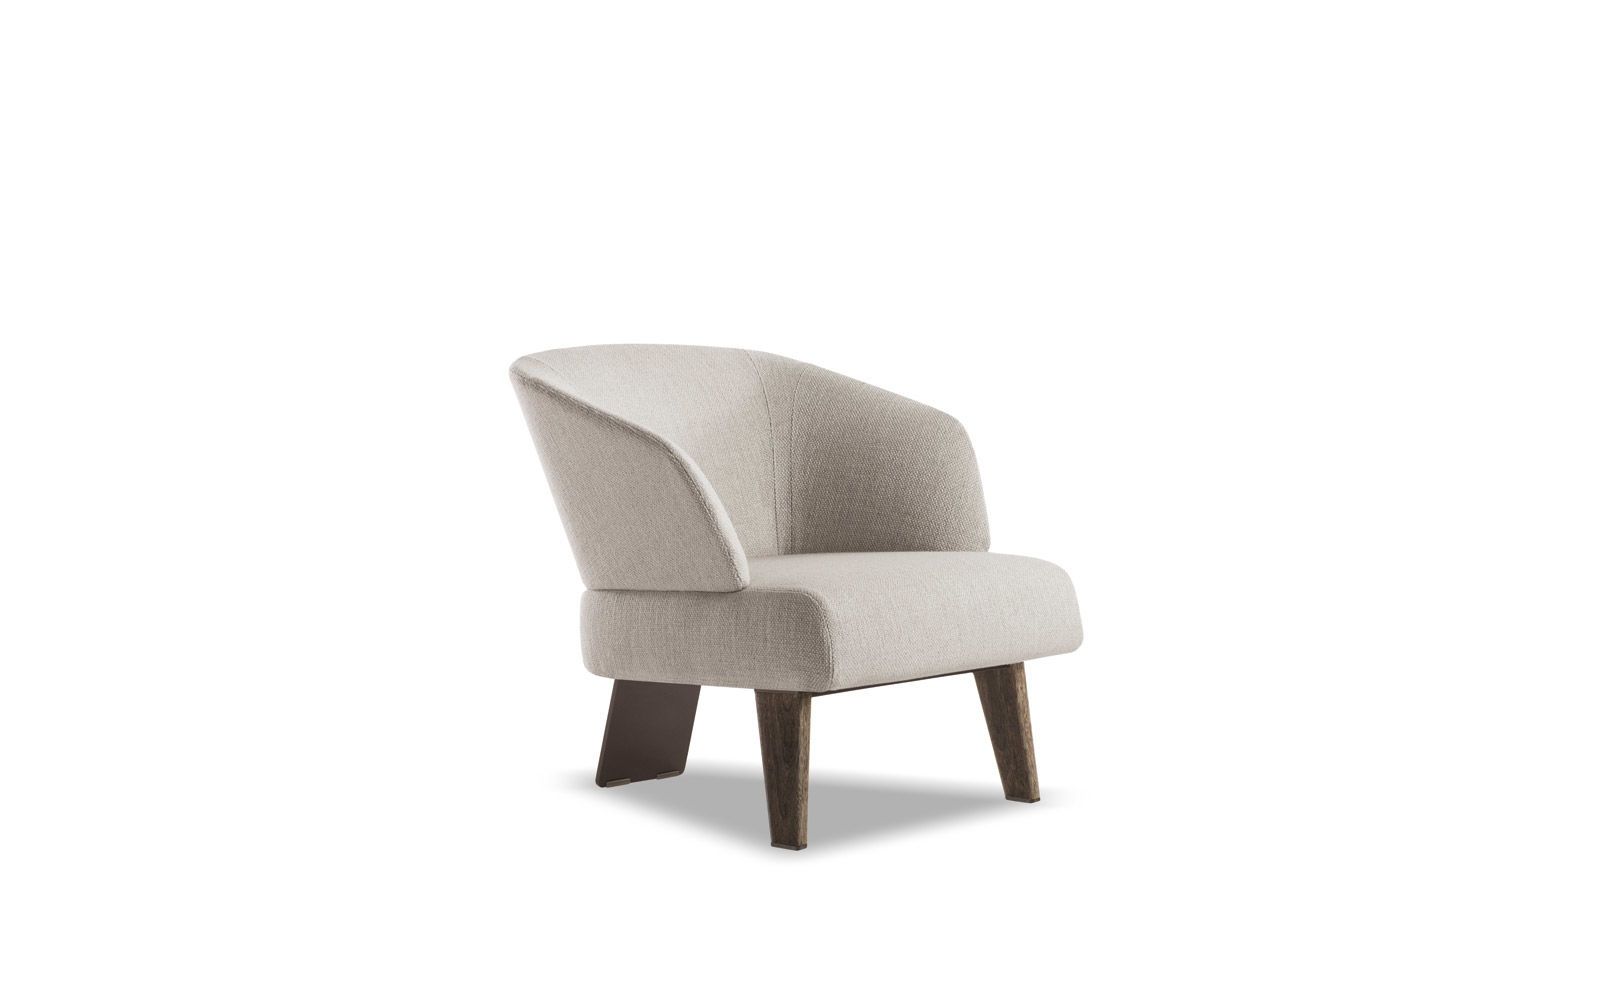 Creed Small Armchairs En Regarding Compact Armchairs (View 7 of 15)